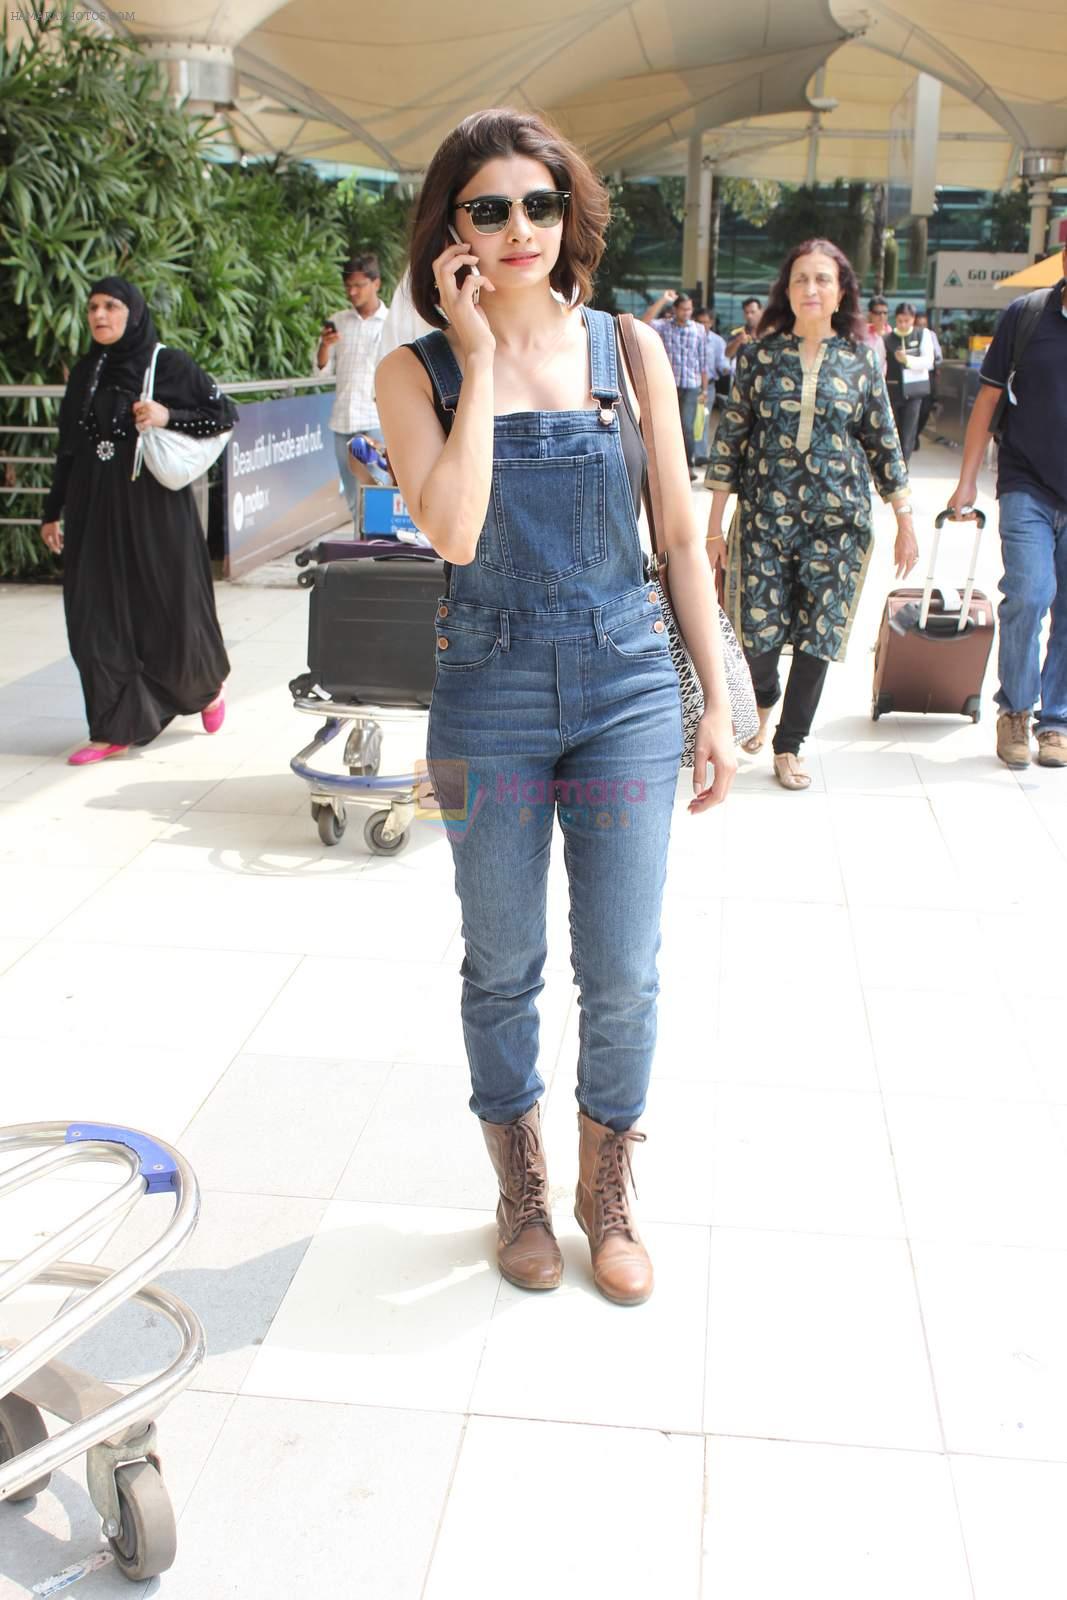 Prachi Desai snapped at airport on 24th Oct 2015